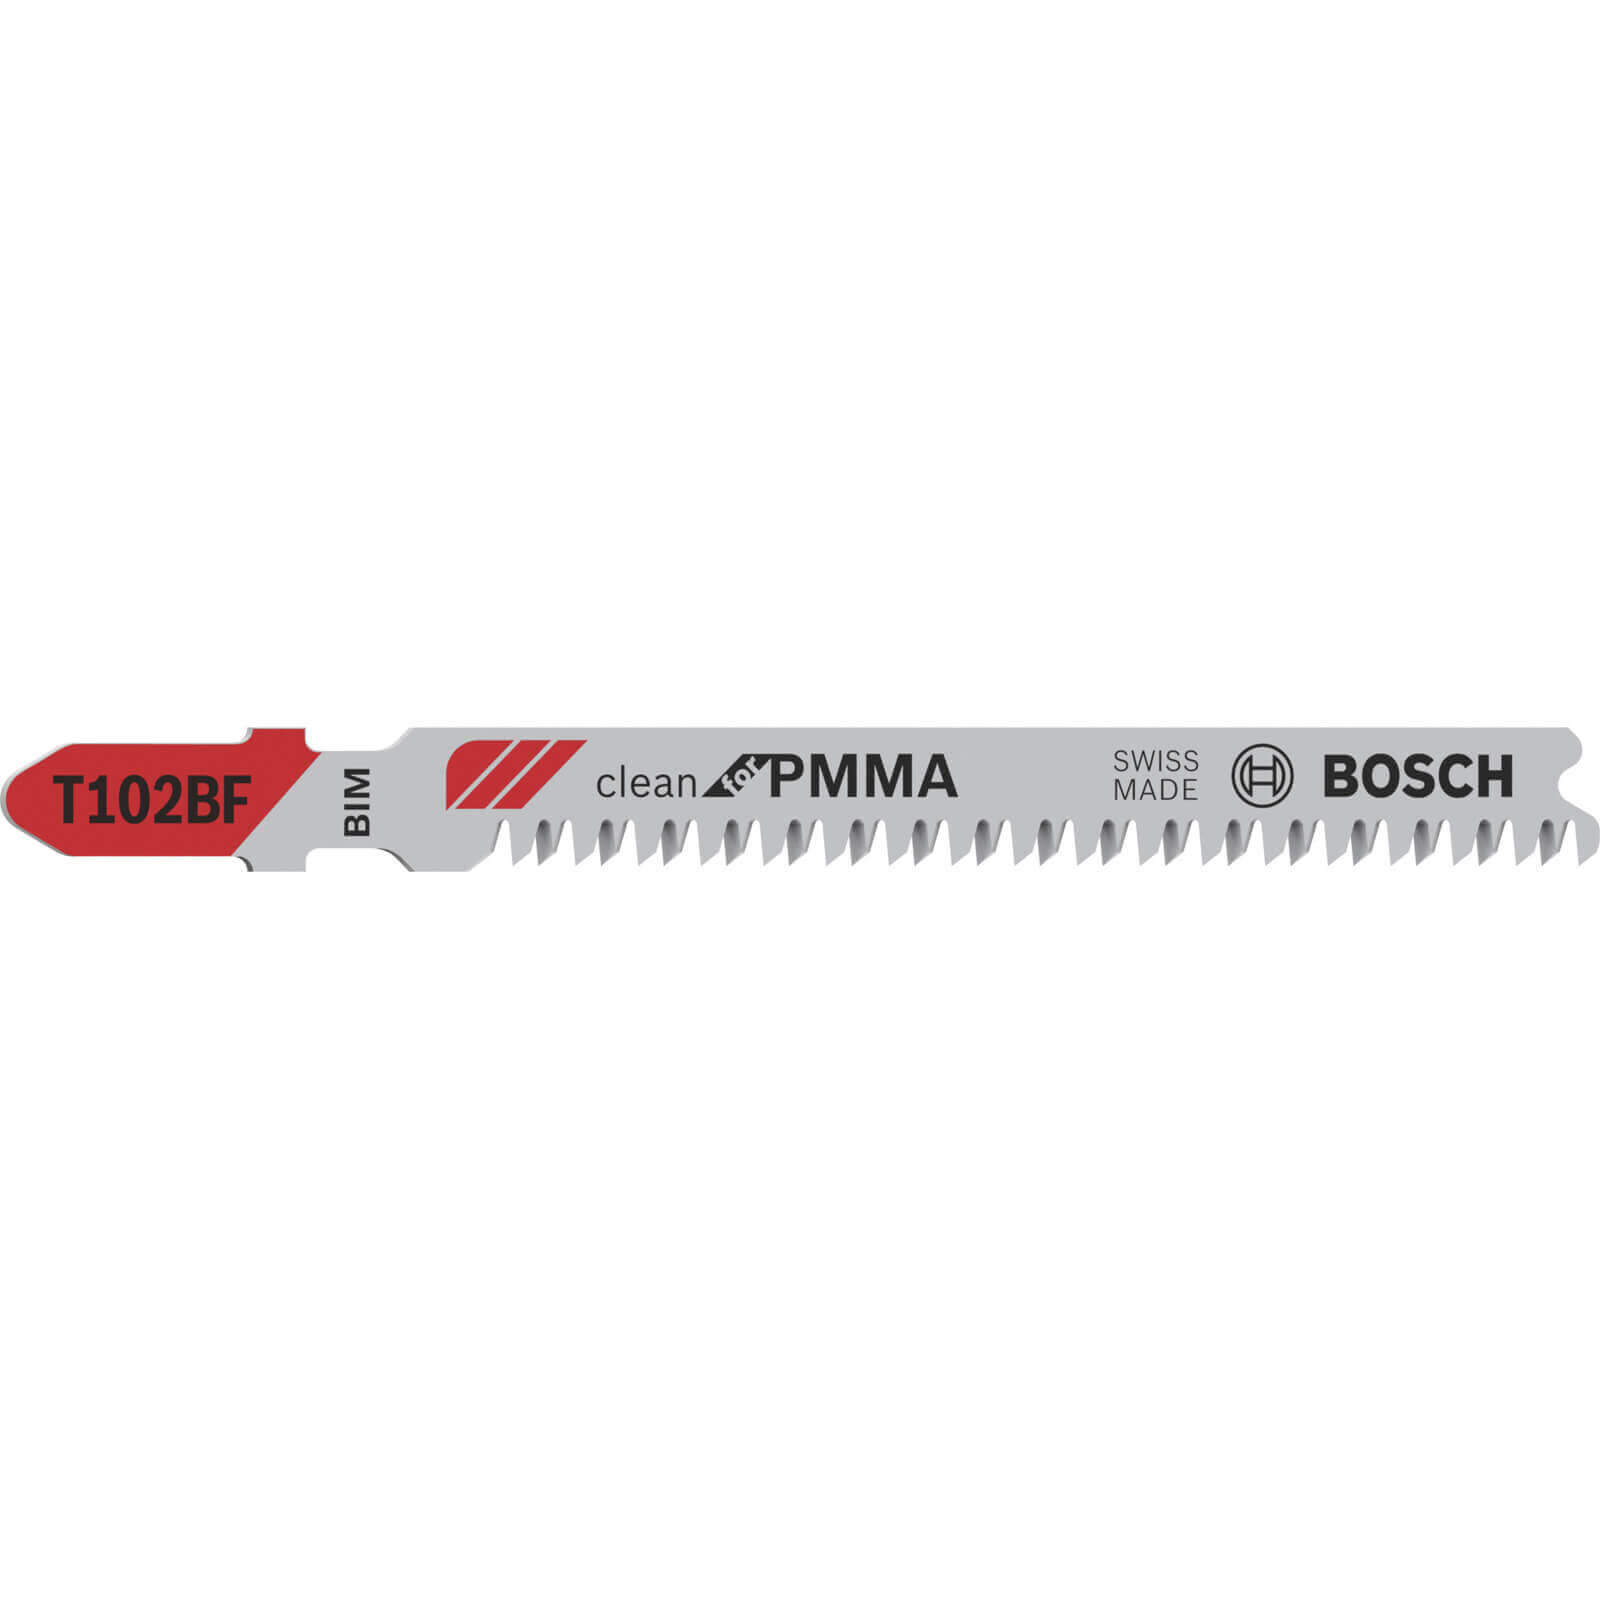 Photos - Power Tool Accessory Bosch T102BF Plastic Perspex Cutting Jigsaw Blade Pack of 3 2608636780 